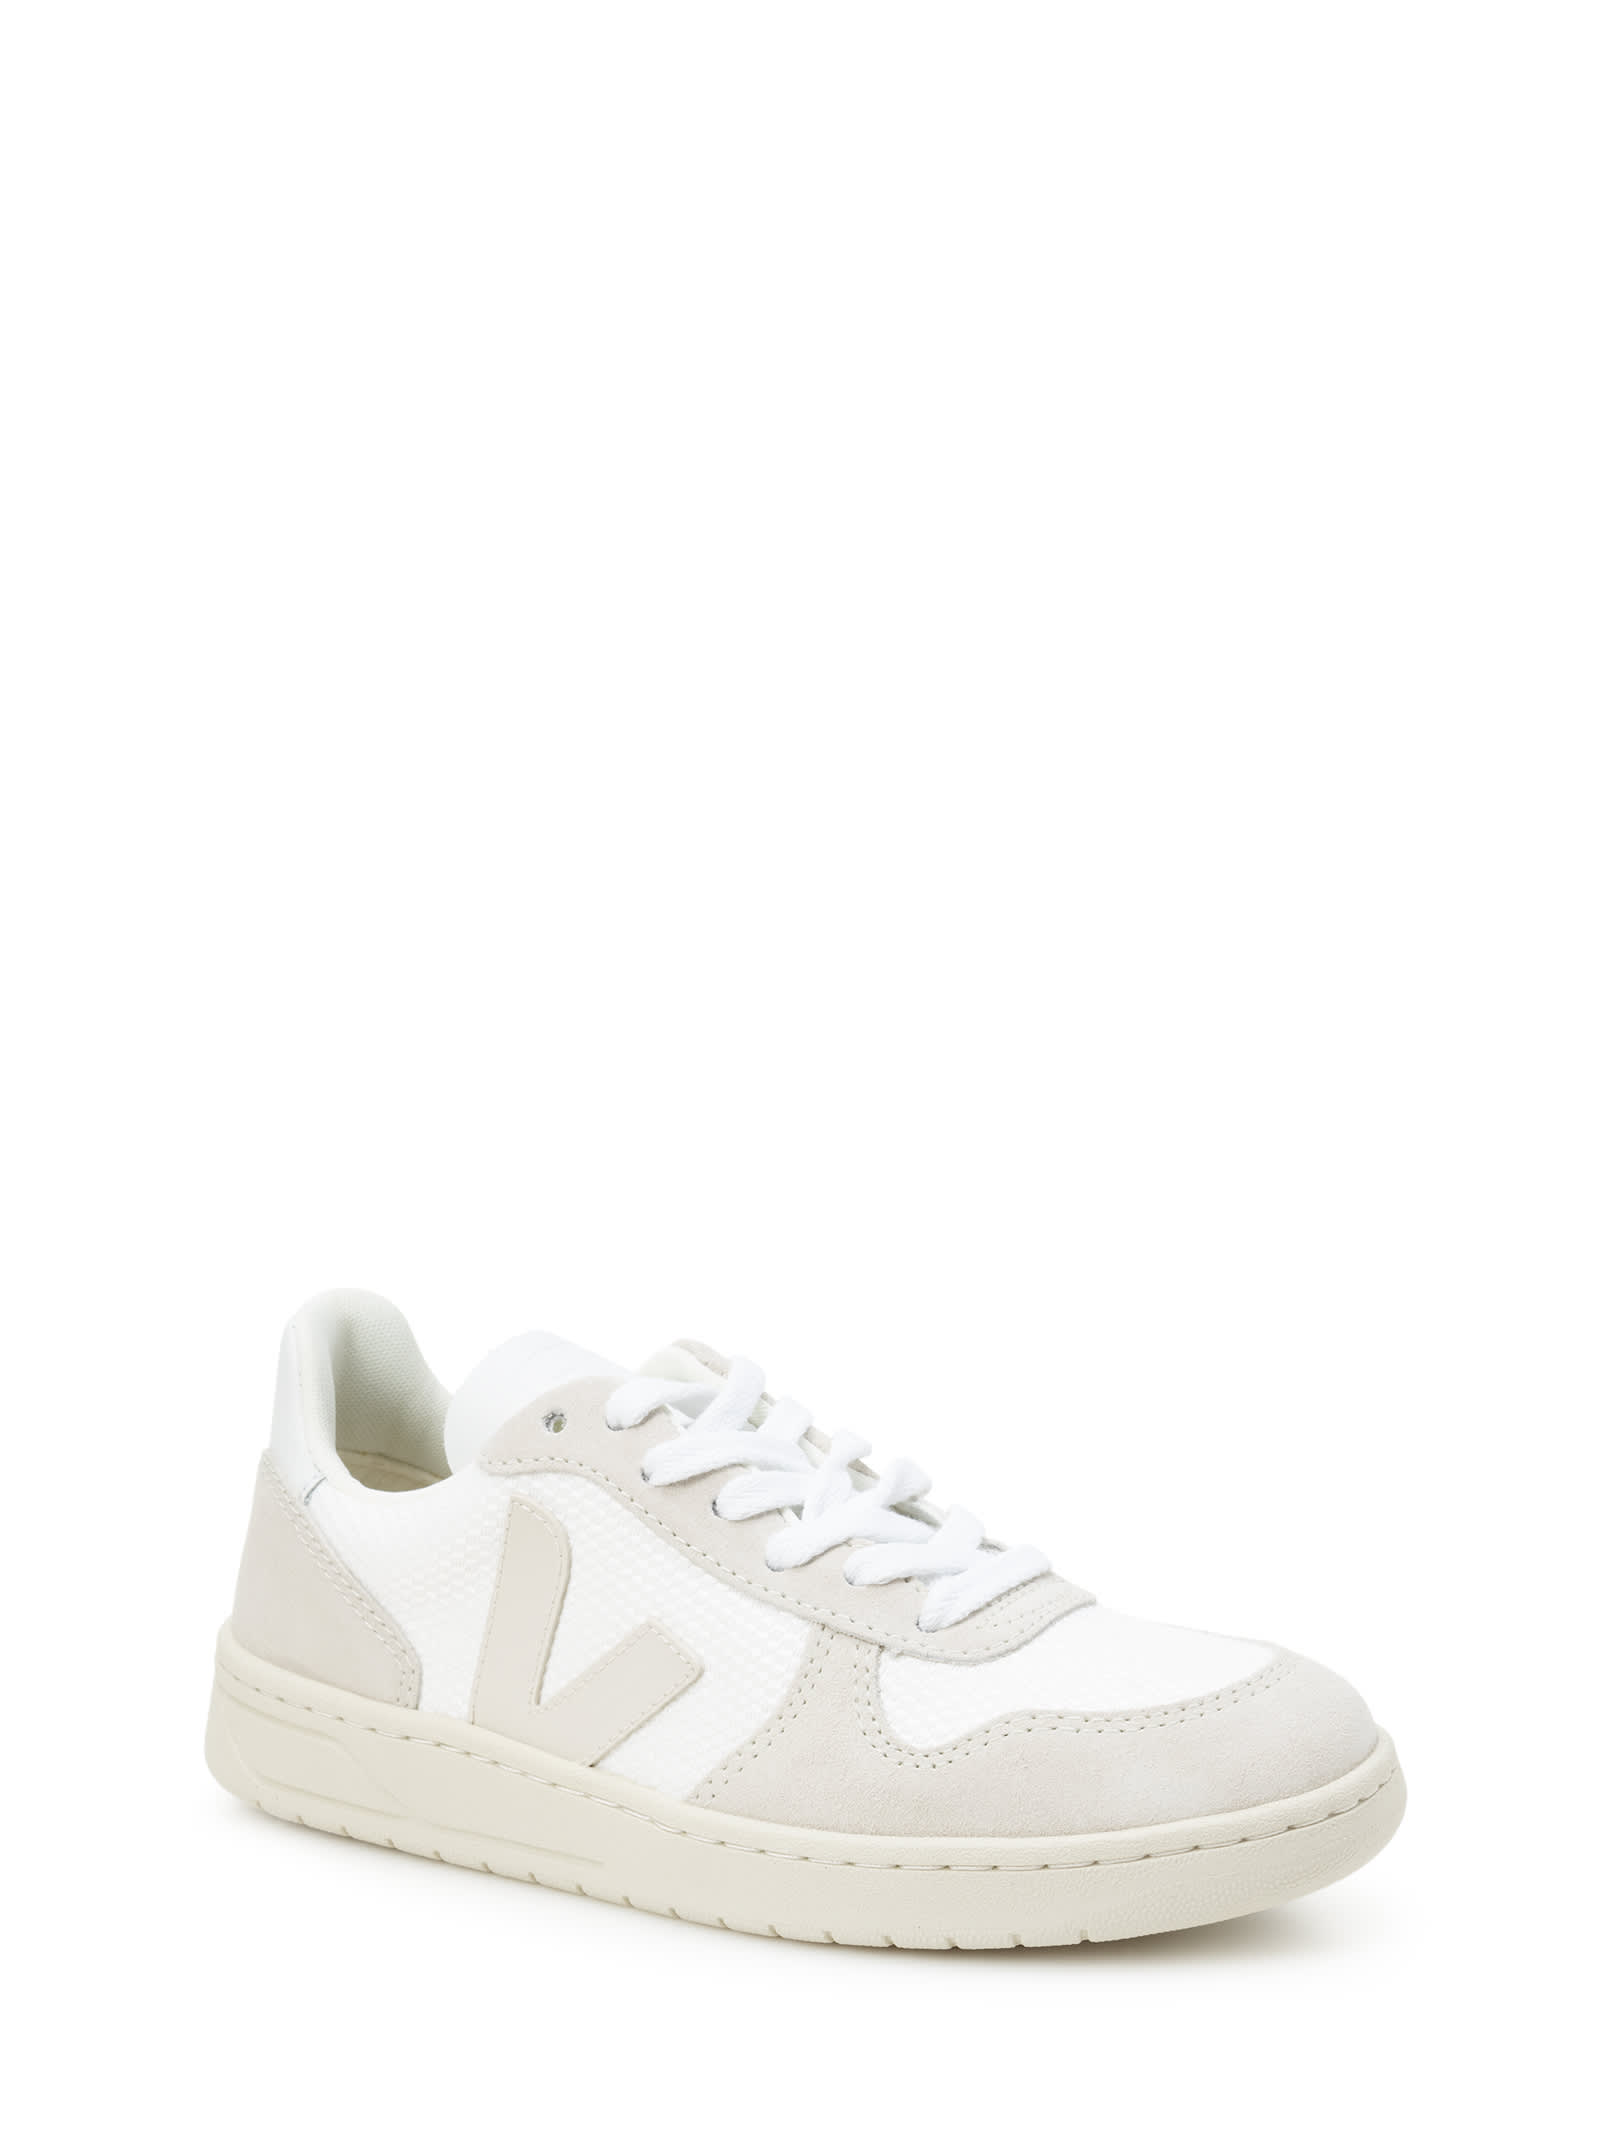 Shop Veja Sneakers In White/natural Pierre